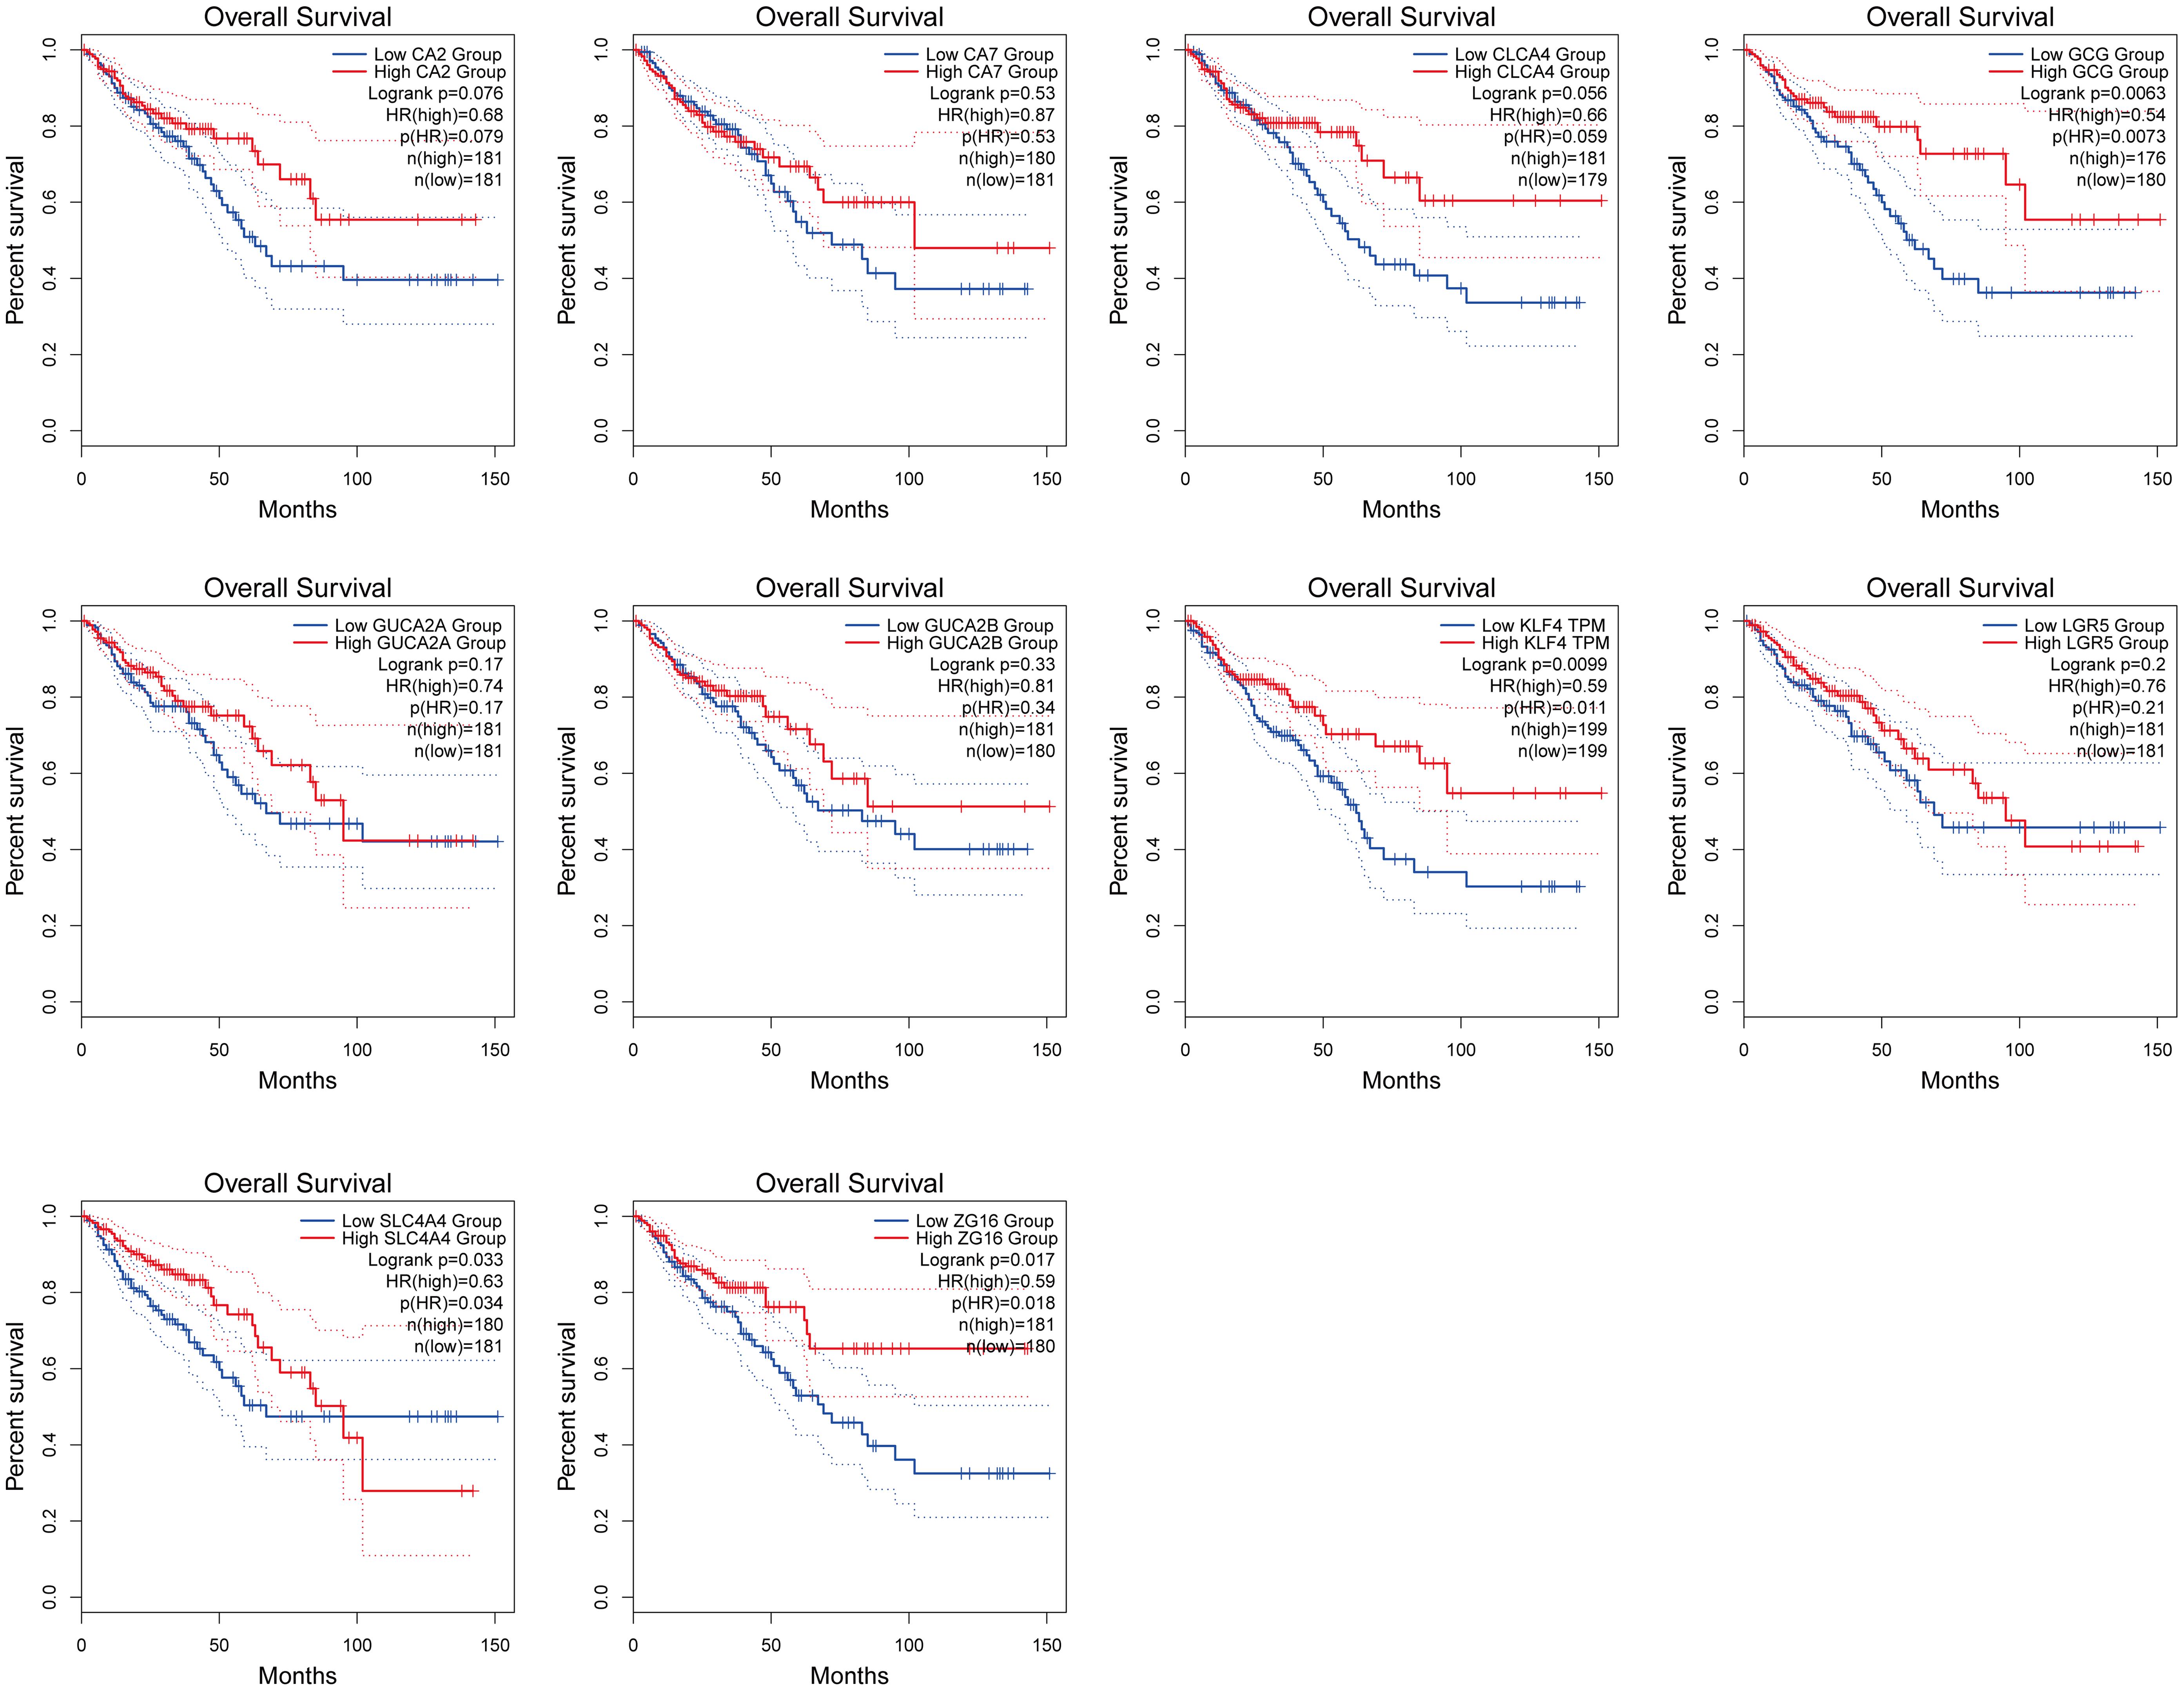 Overall survival analysis of 10 hub genes in colorectal cancer patients.